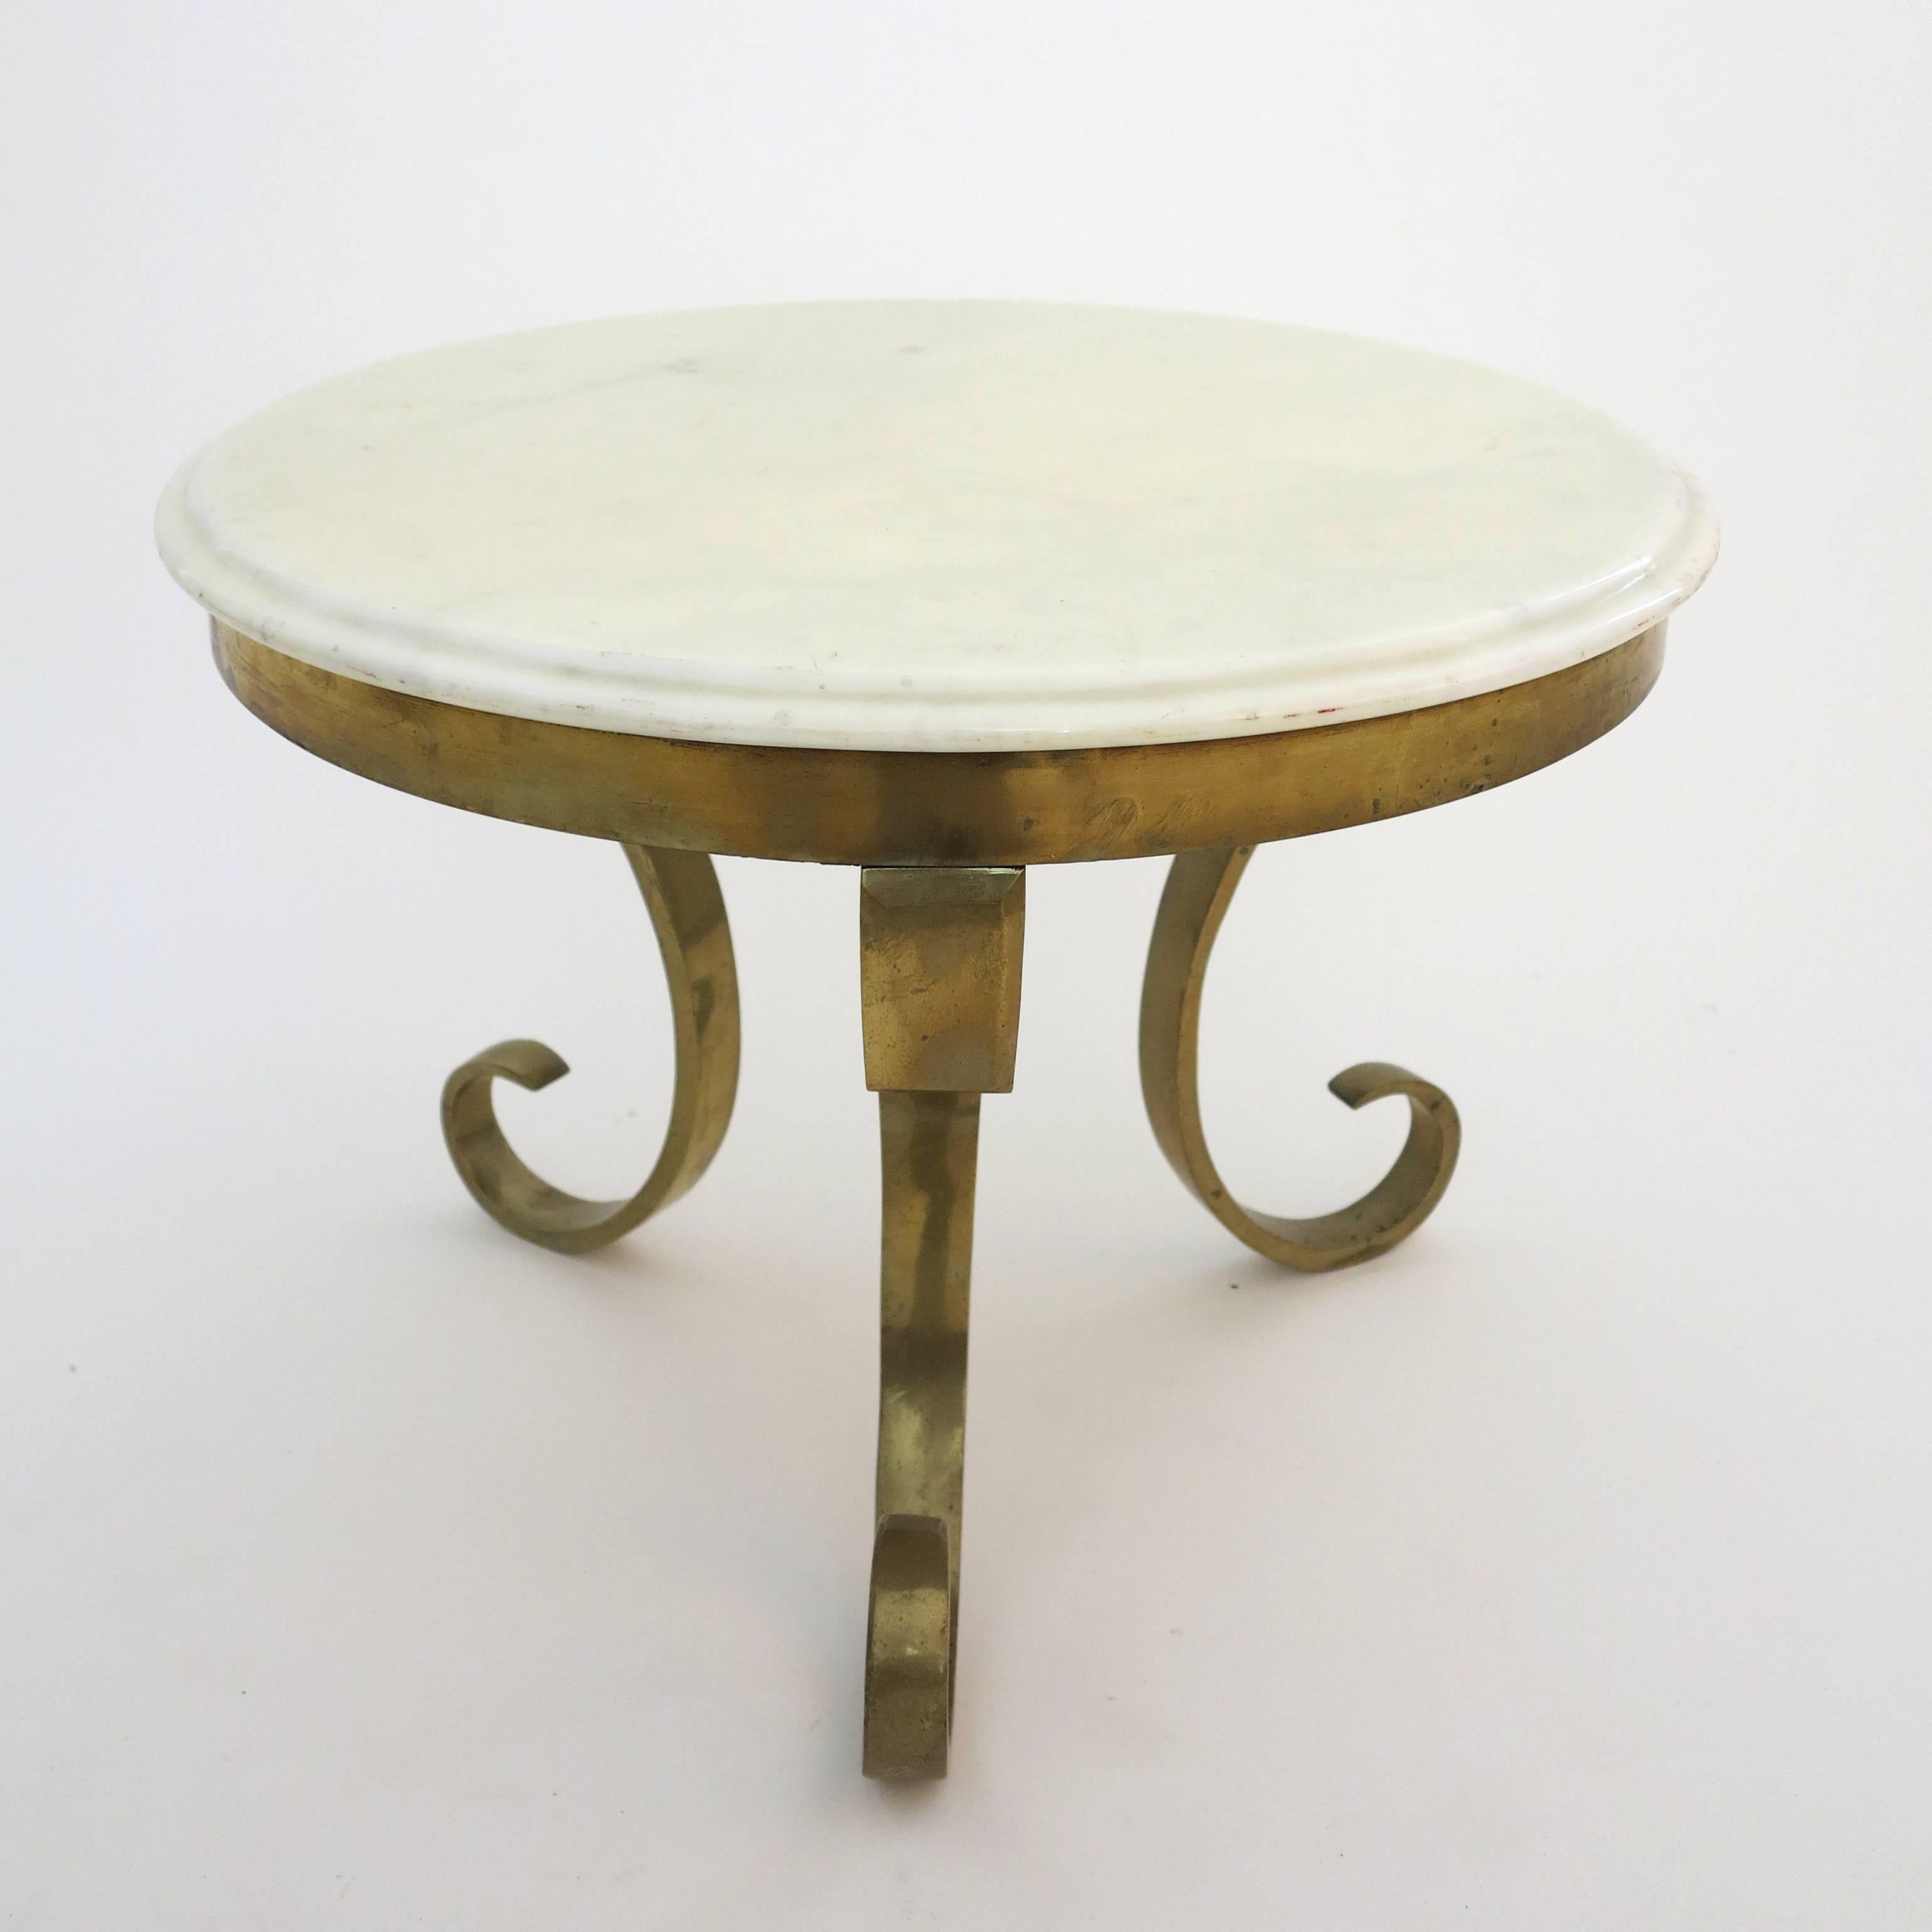 Elegant round side table, manufactured in heavy and solid bronze topped with white marble by Muller´s of Mexico.